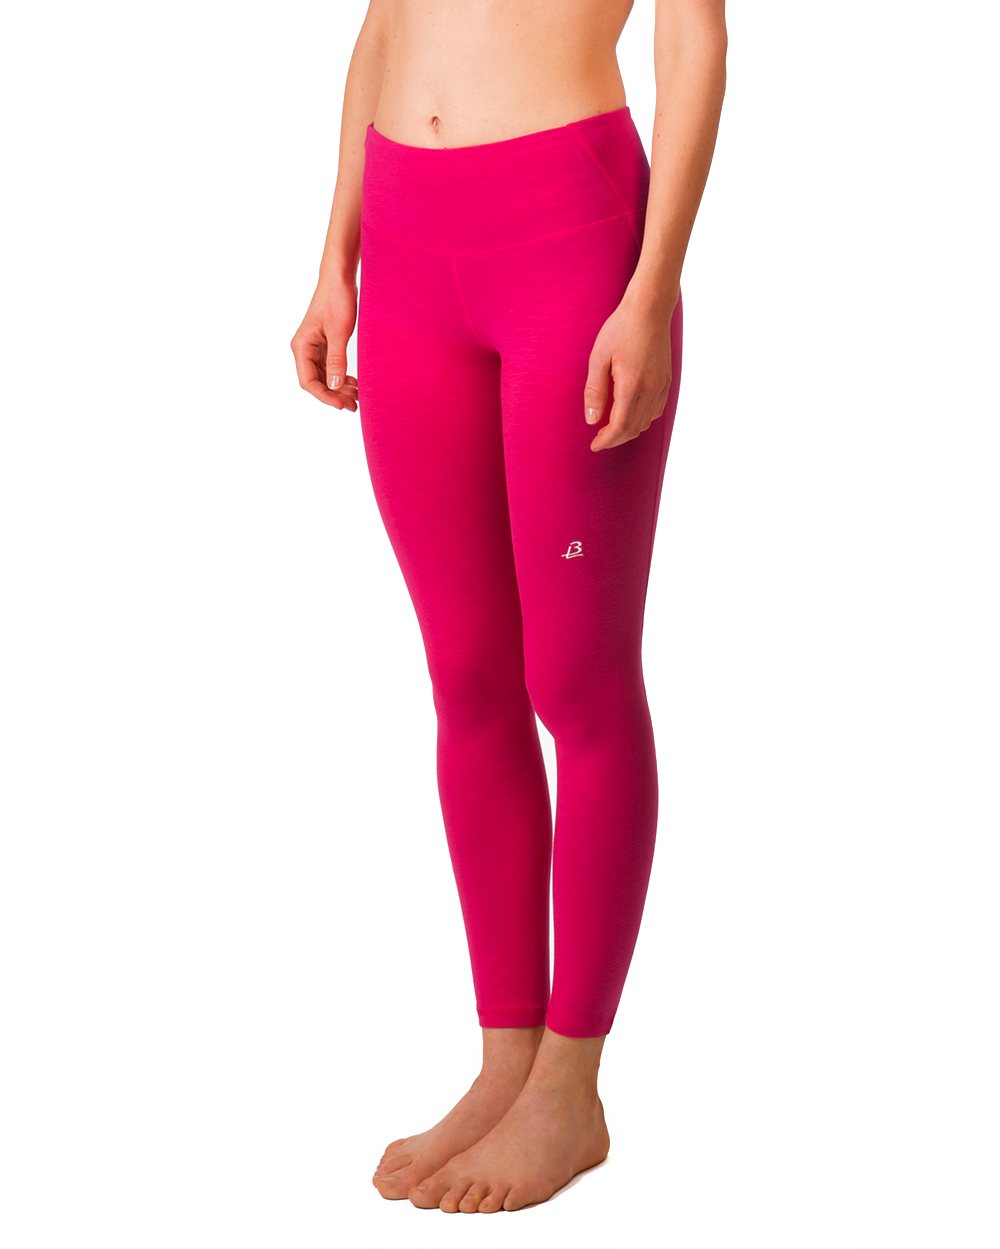 How Are Seamless Leggings Made - NF Seamless Manufacturing Company